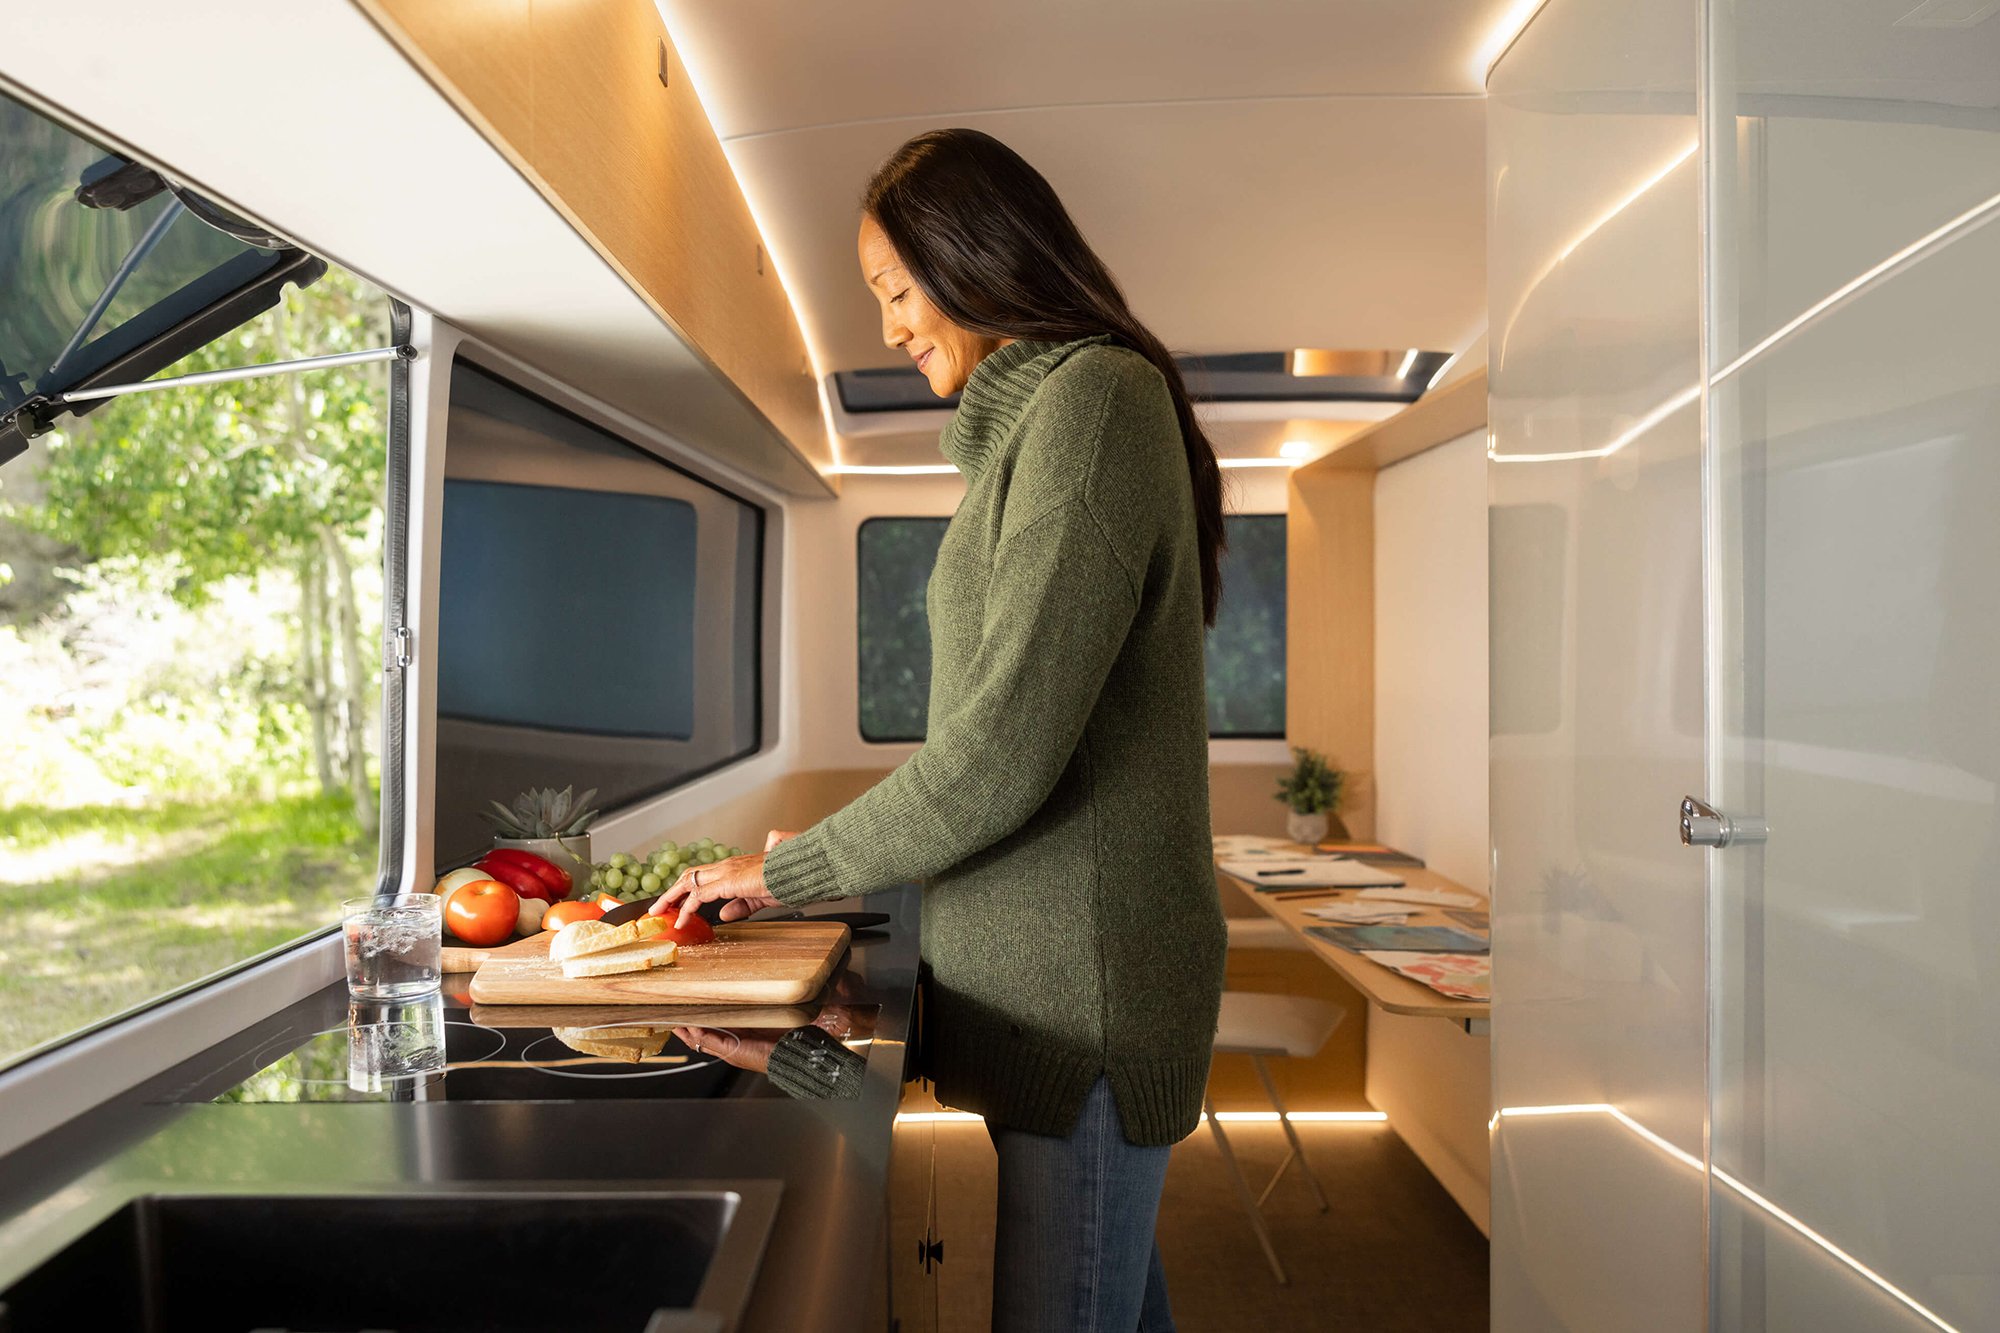 The kitchen design of the Interior of the all-electric, self-propelled travel trailer Pebble Flow